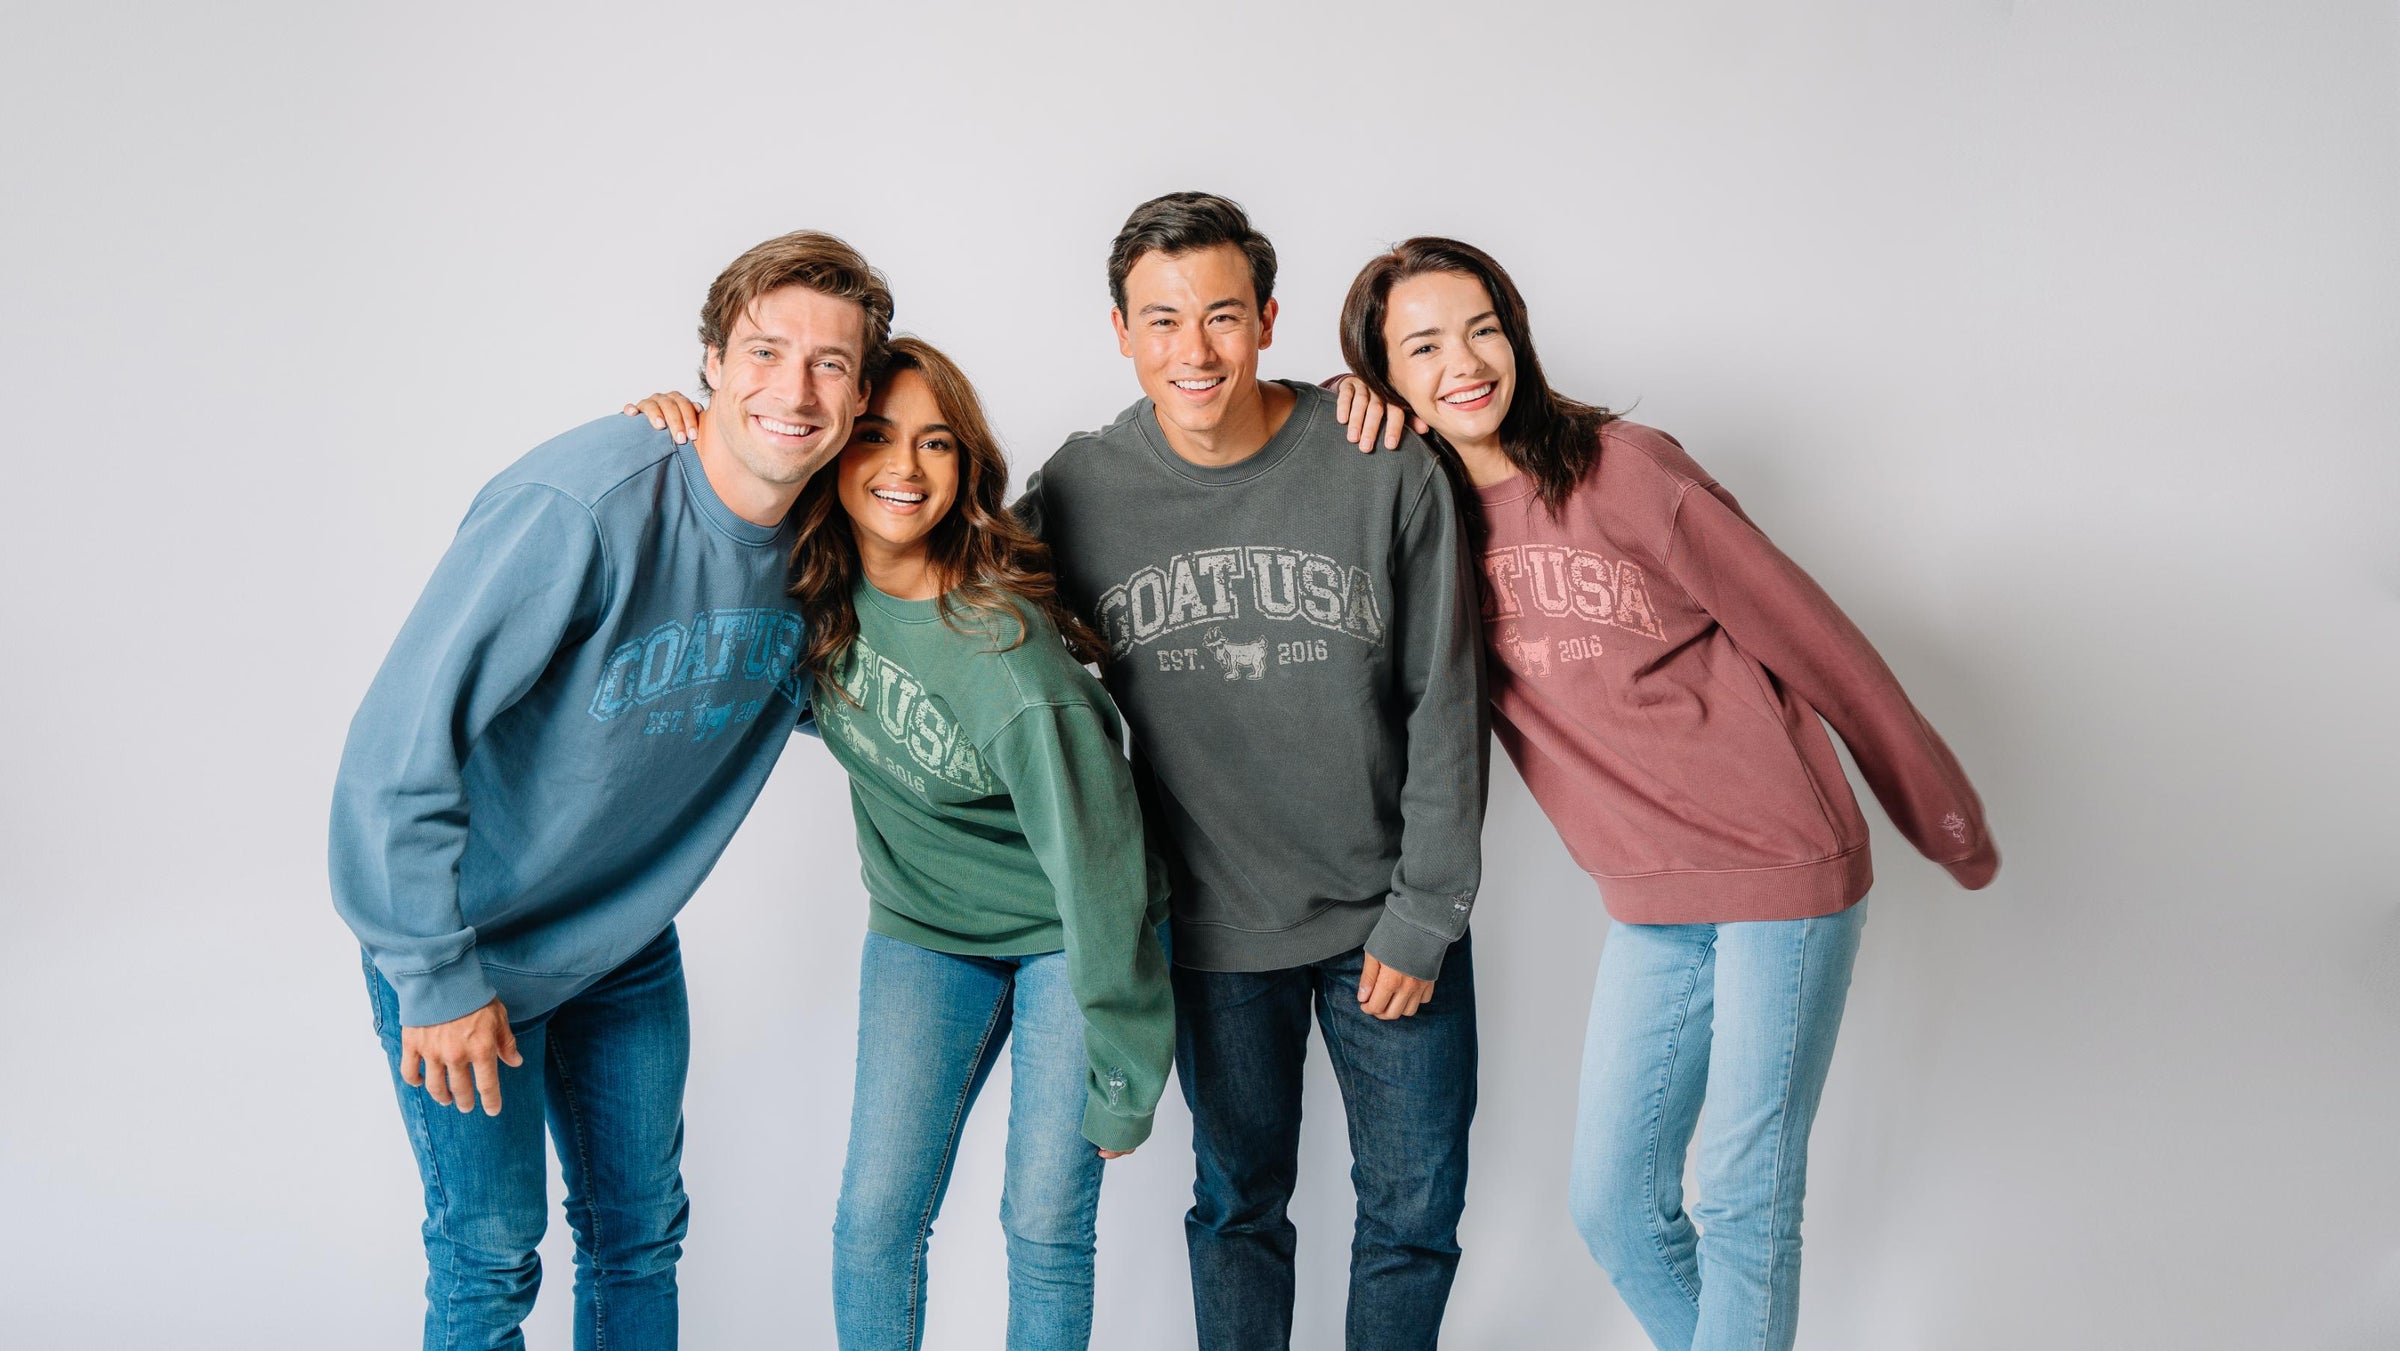 Four people standing side by side wearing different color sweatshirts